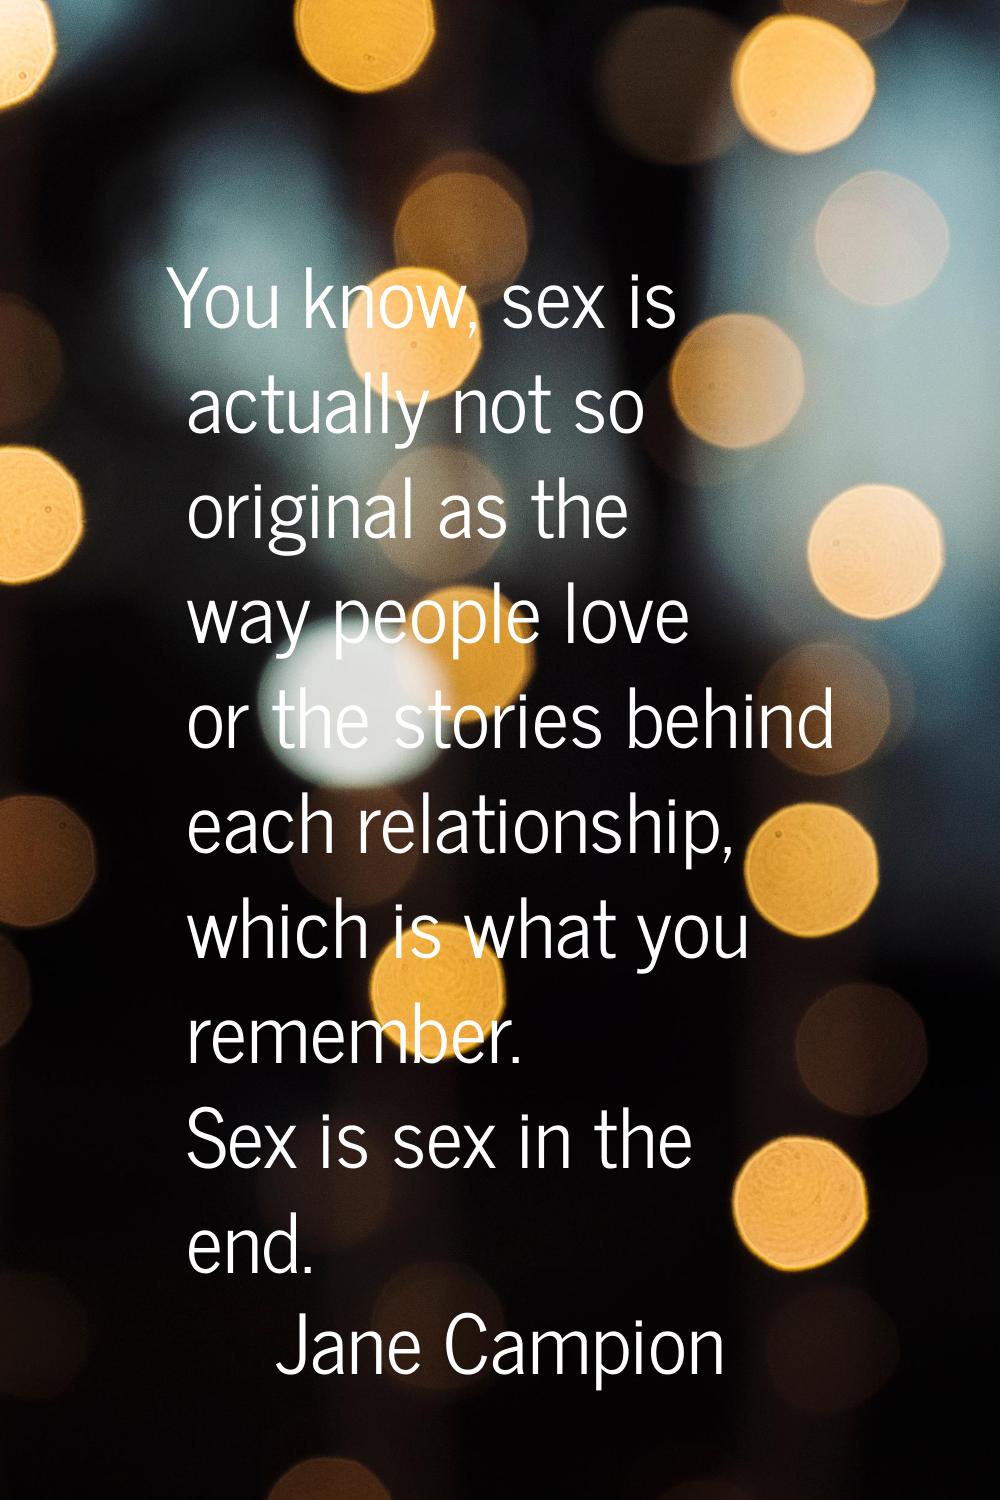 You know, sex is actually not so original as the way people love or the stories behind each relatio